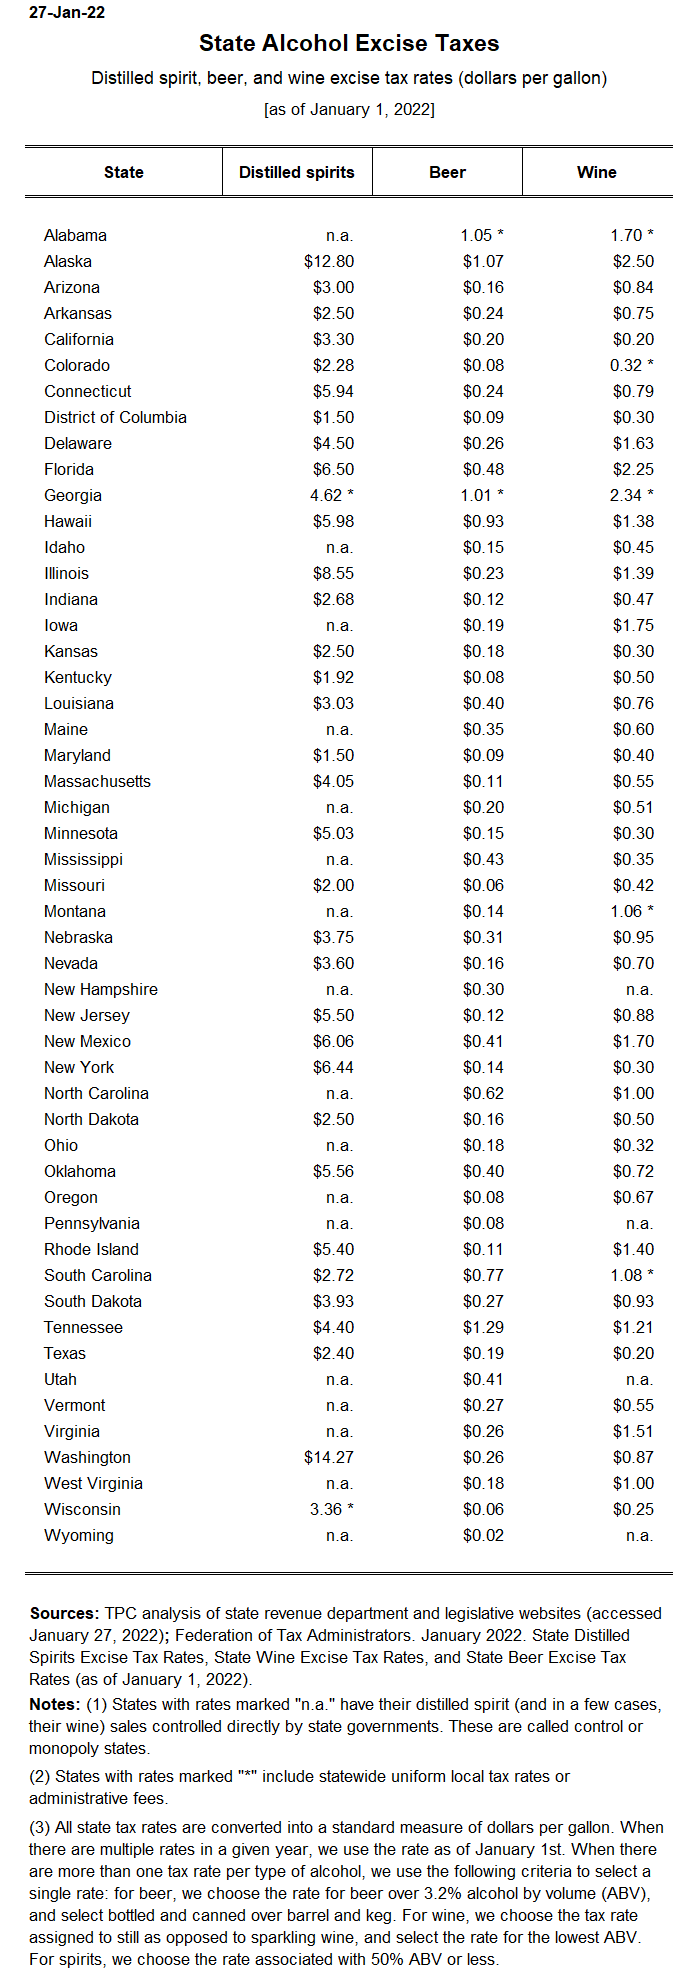 State alcohol excise tax rates